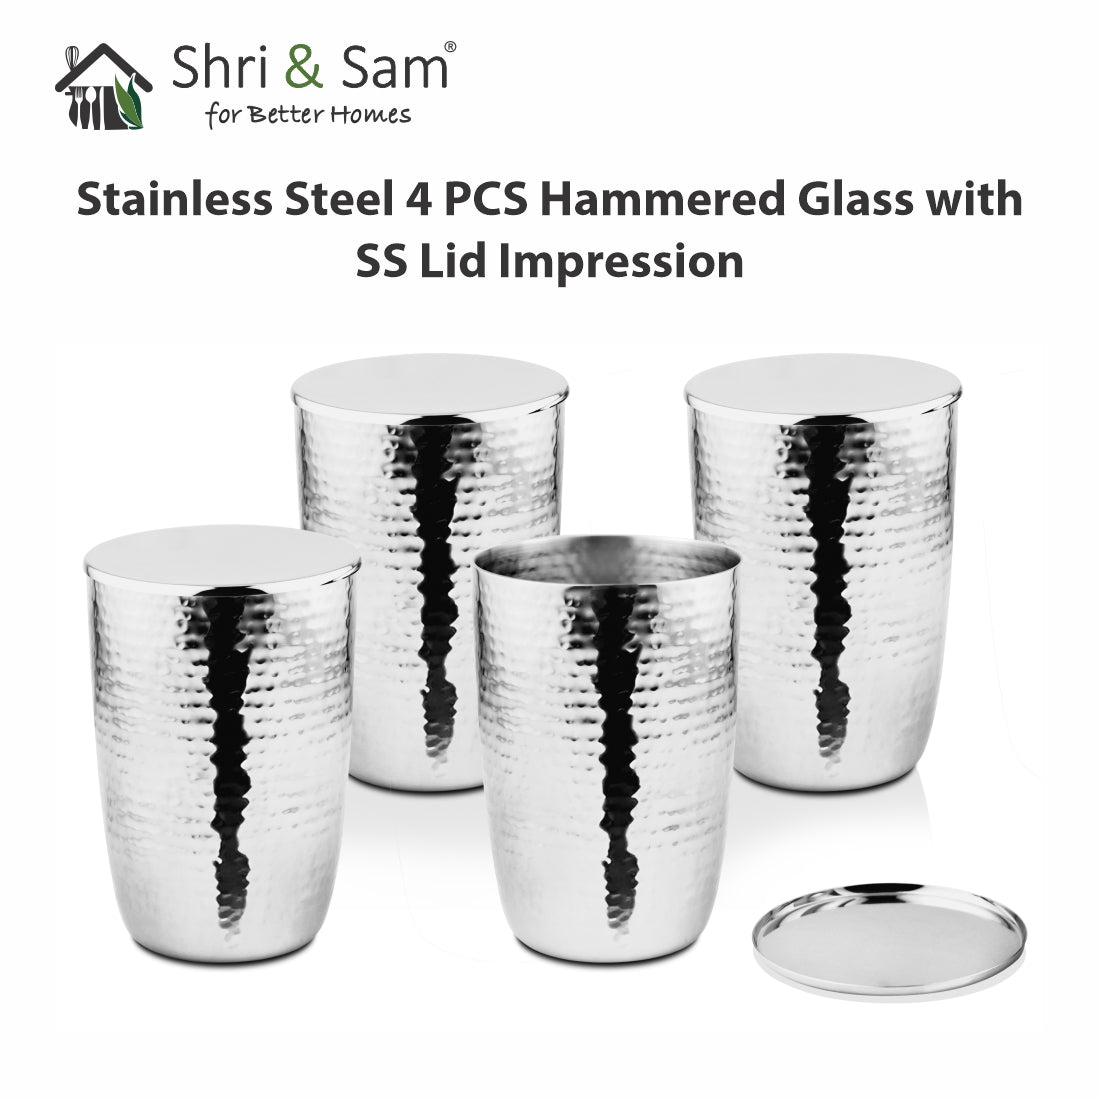 Stainless Steel 4 PCS Hammered Glass with SS Lid Impression